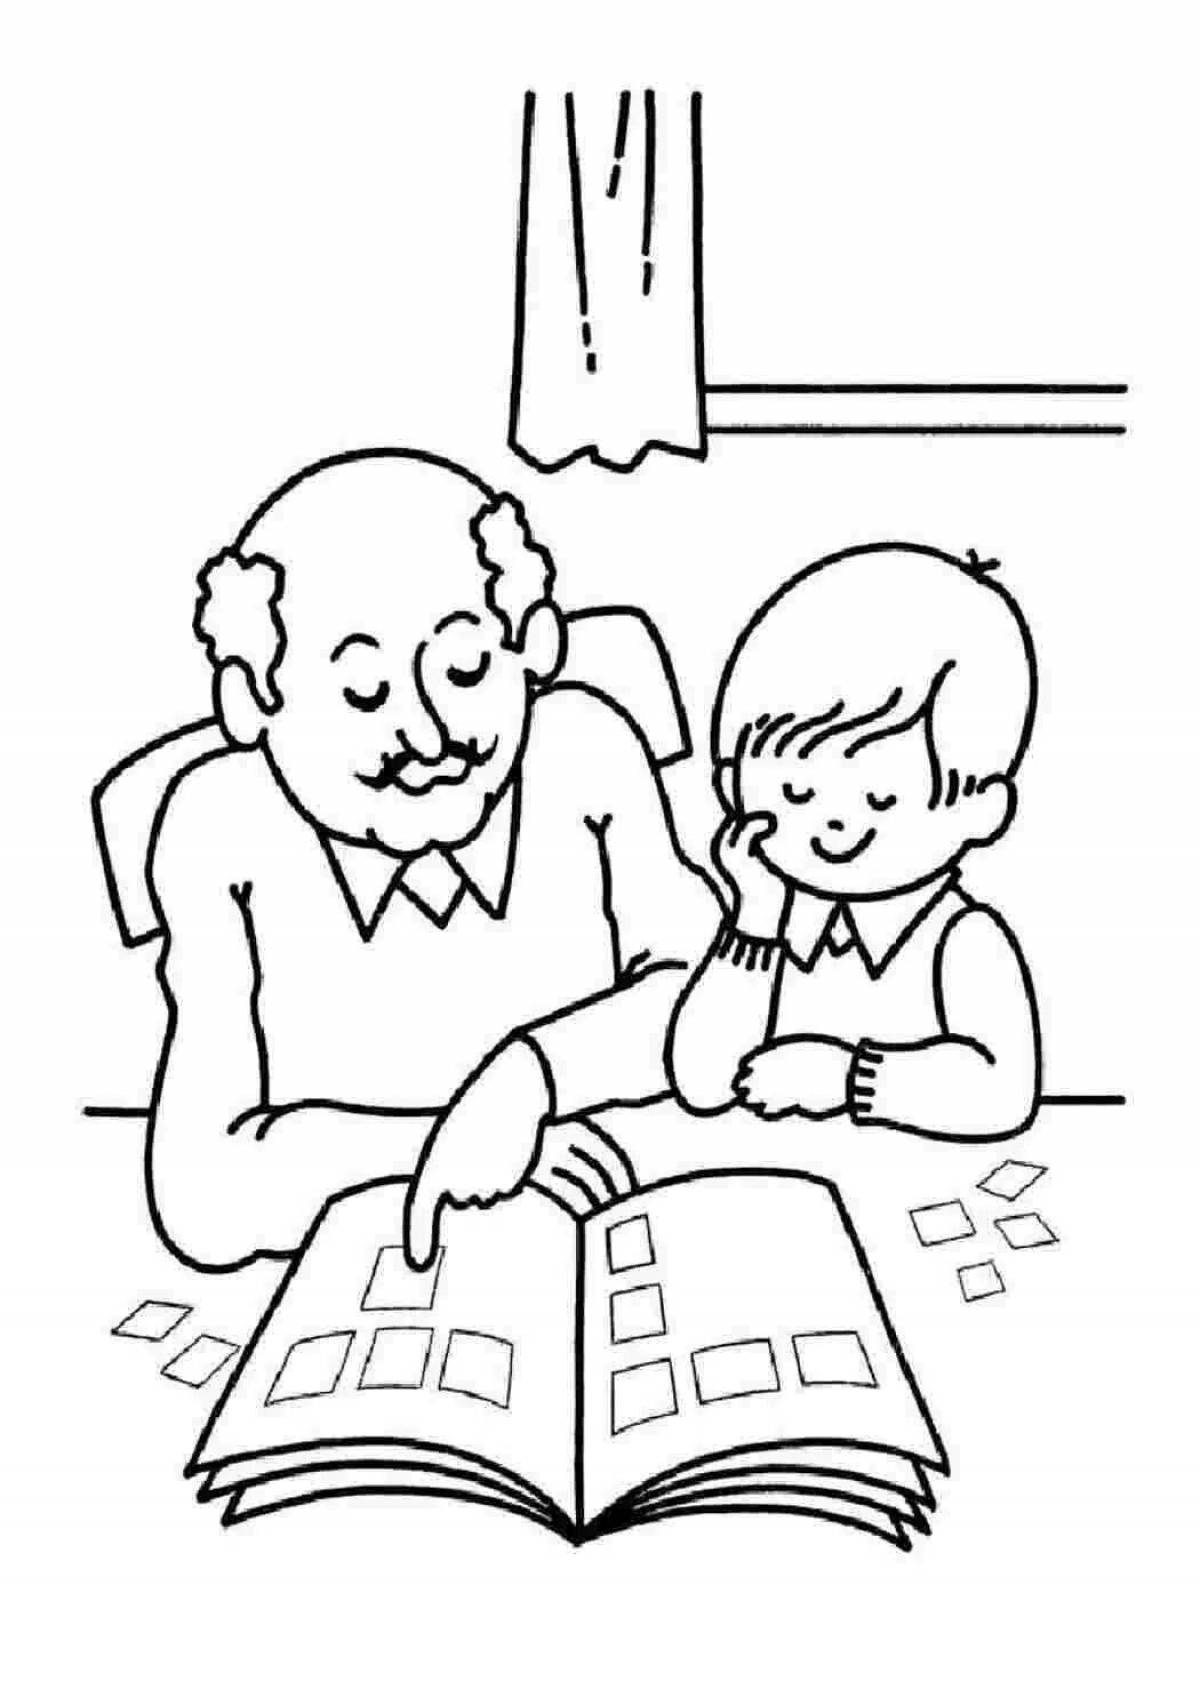 Exciting coloring card with grandfather